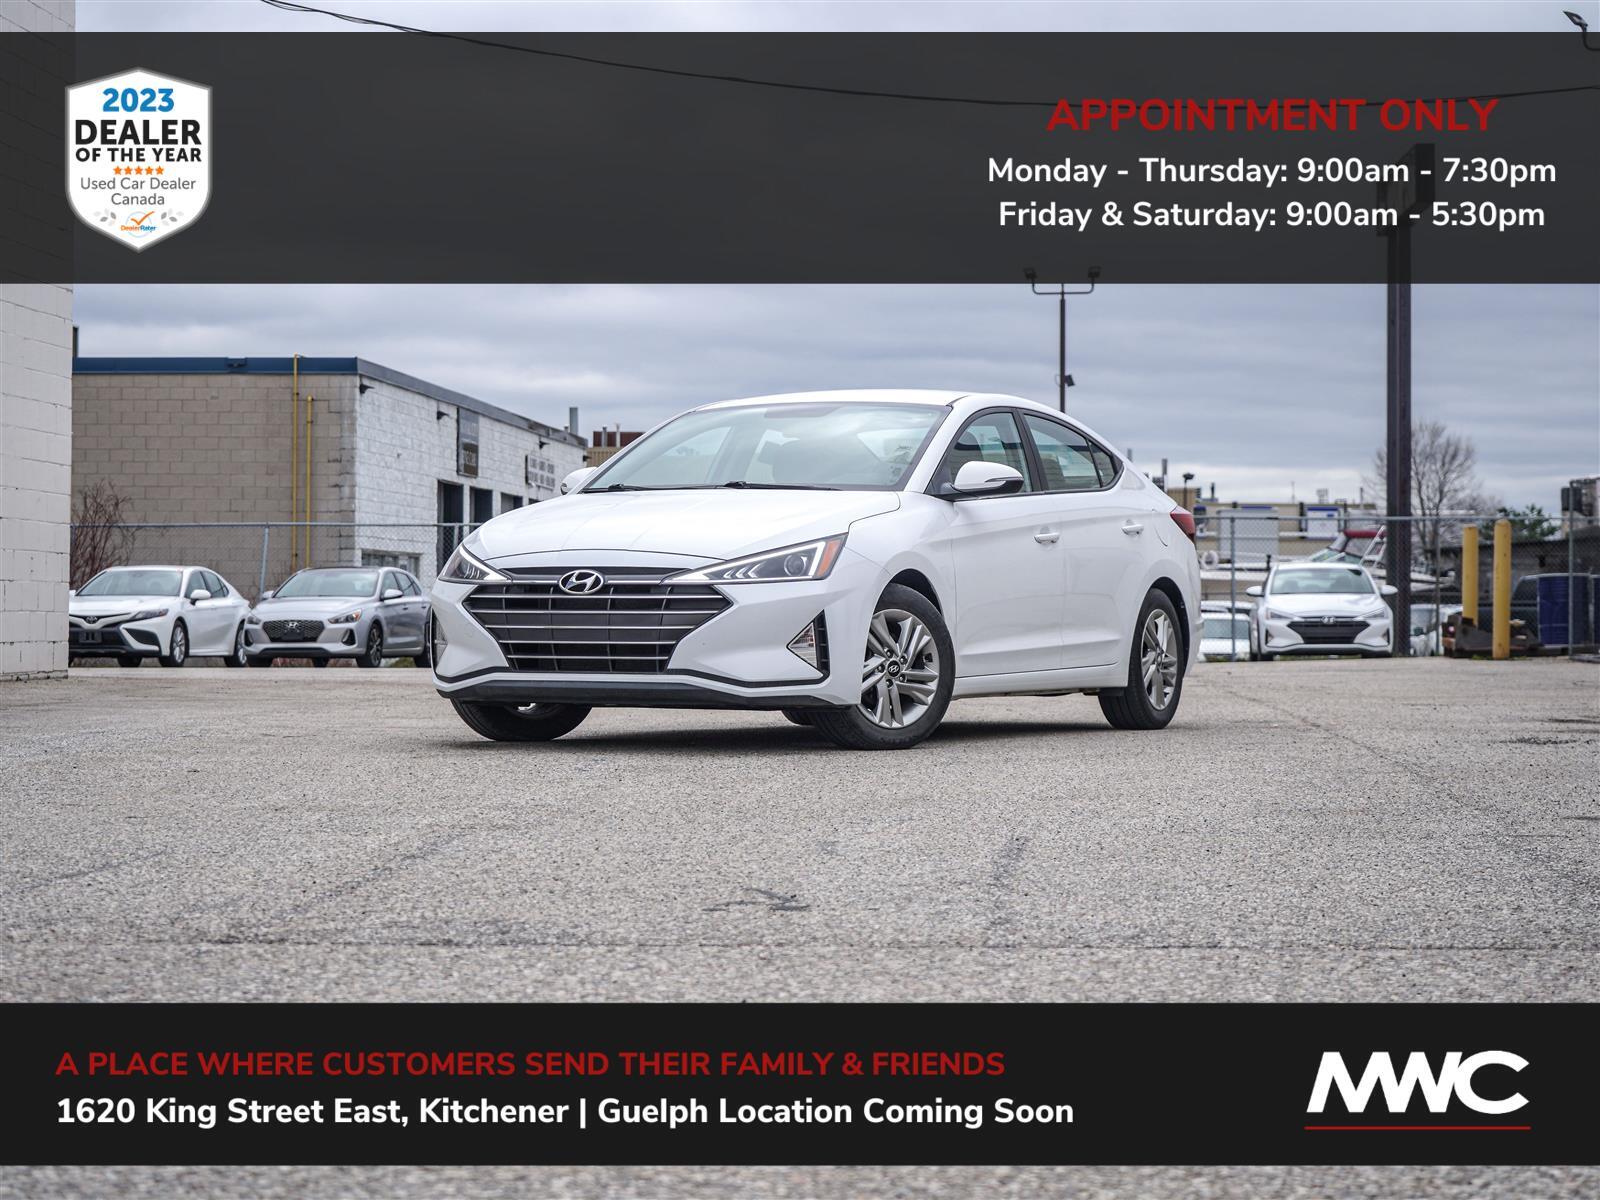 2020 Hyundai Elantra PREFERRED | IN GUELPH, BY APPT. ONLY